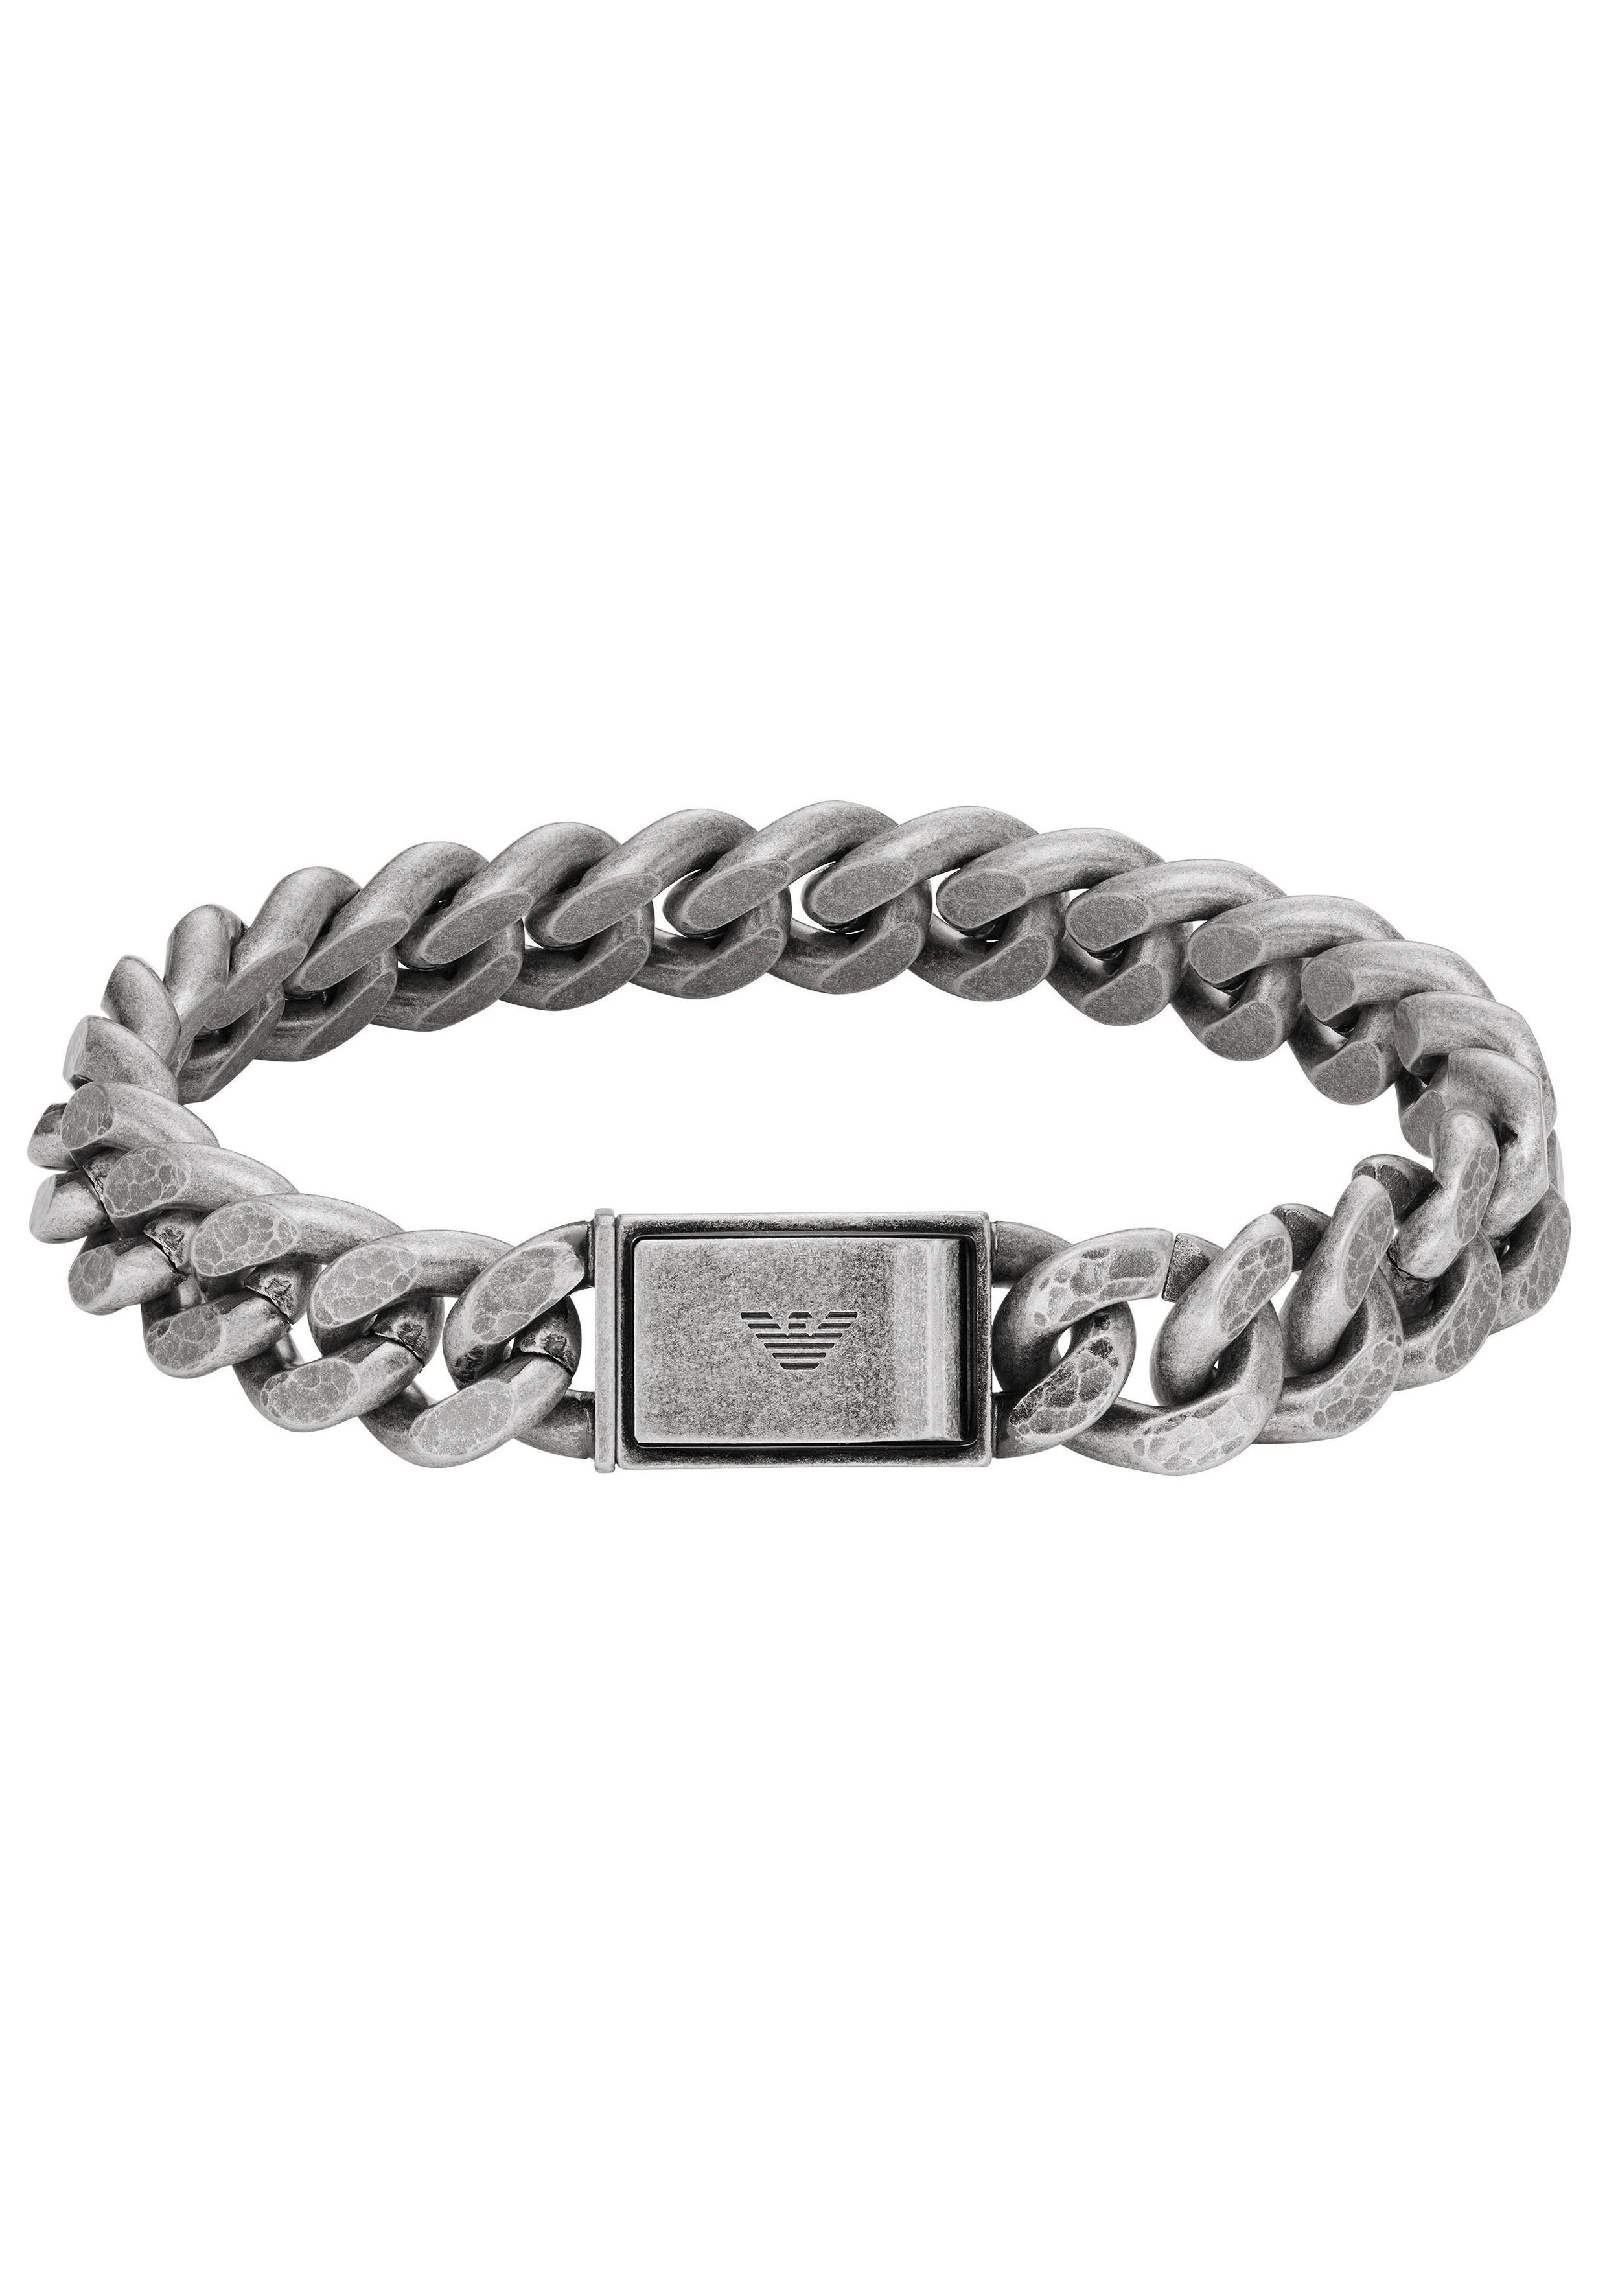 CHAINED, Emporio EGS3036040 TREND, ICONIC Armani Armband